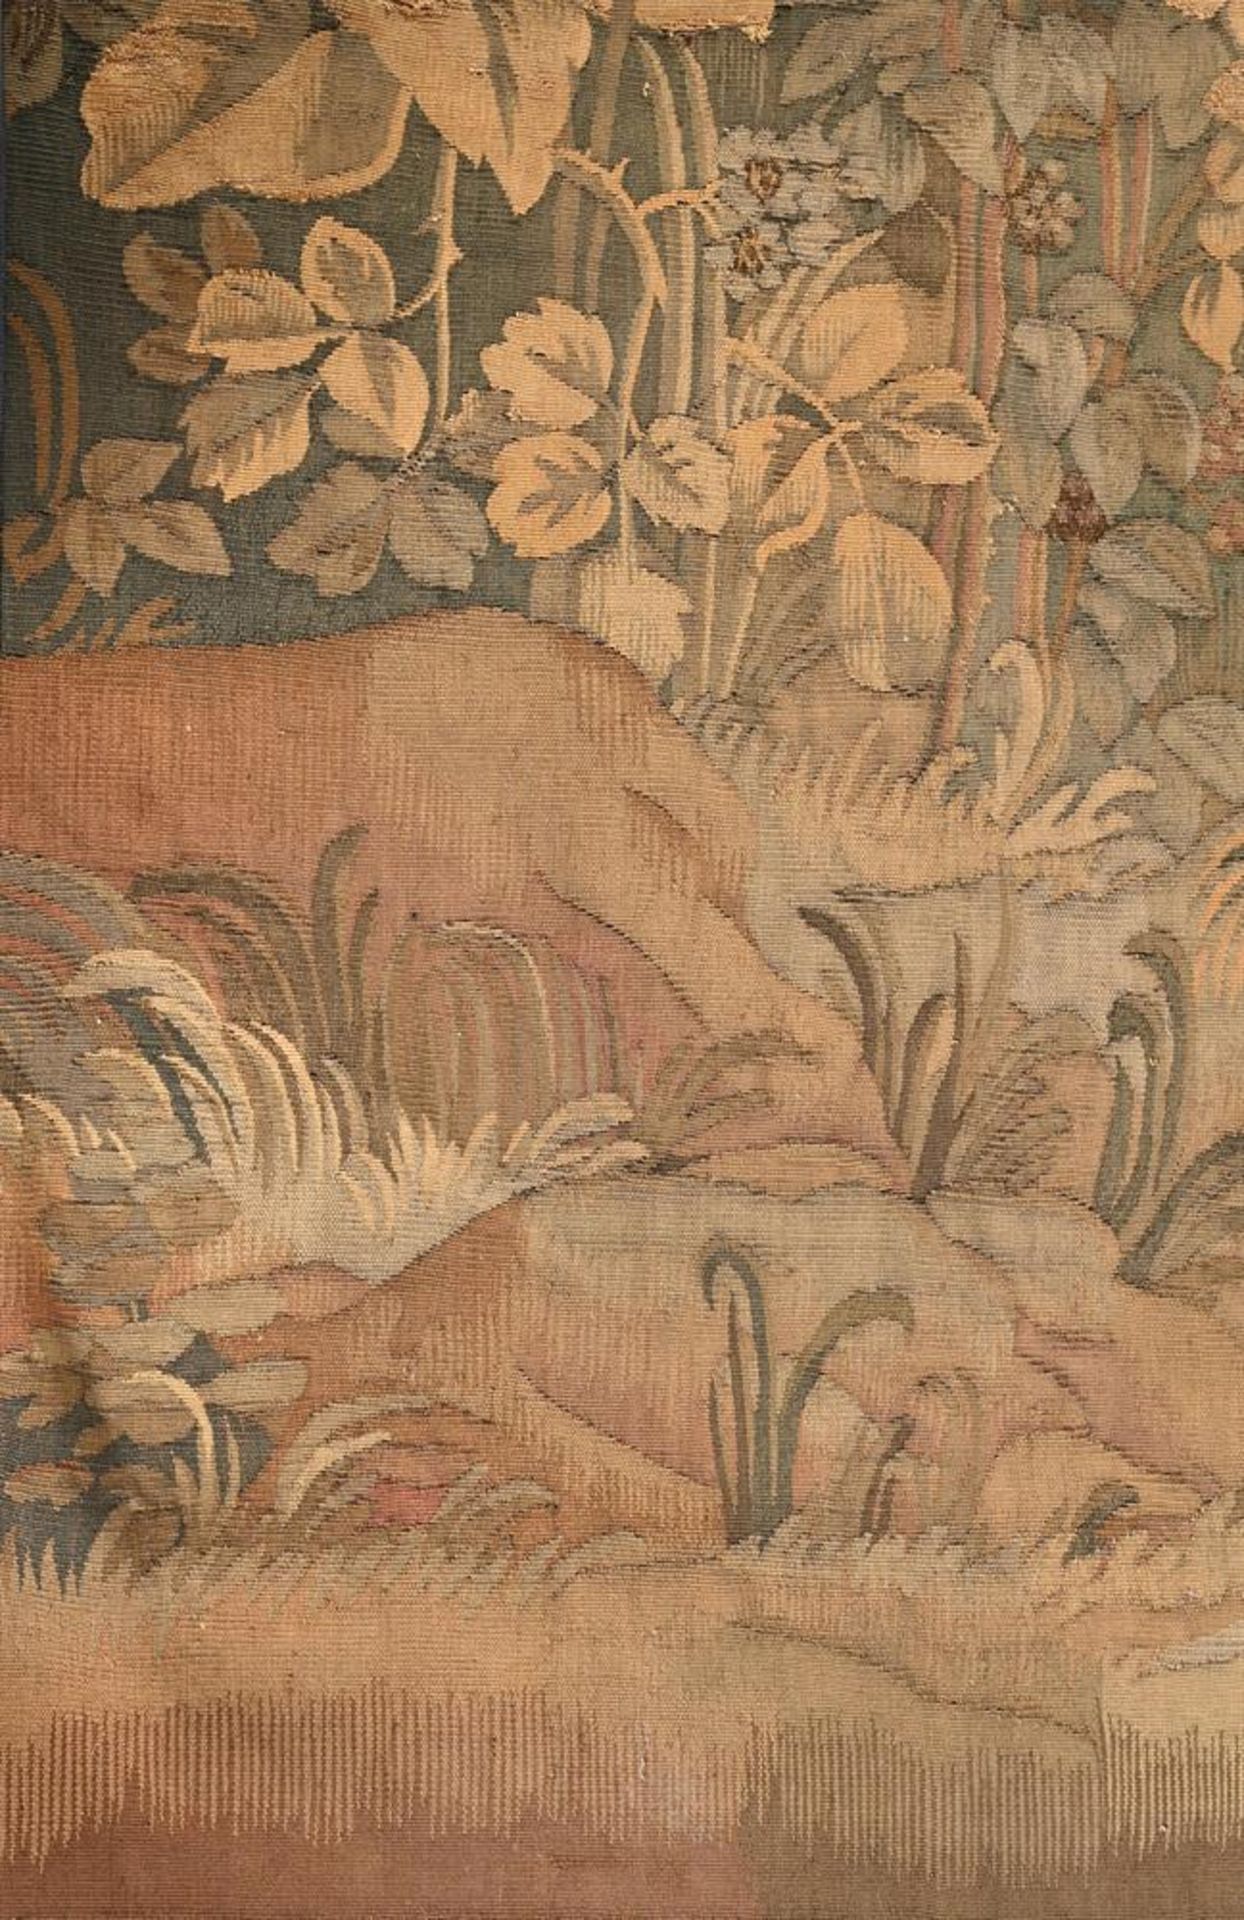 A CONTINENTAL VERDURE TAPESTRY, PROBABLY 17TH CENTURY - Image 3 of 3